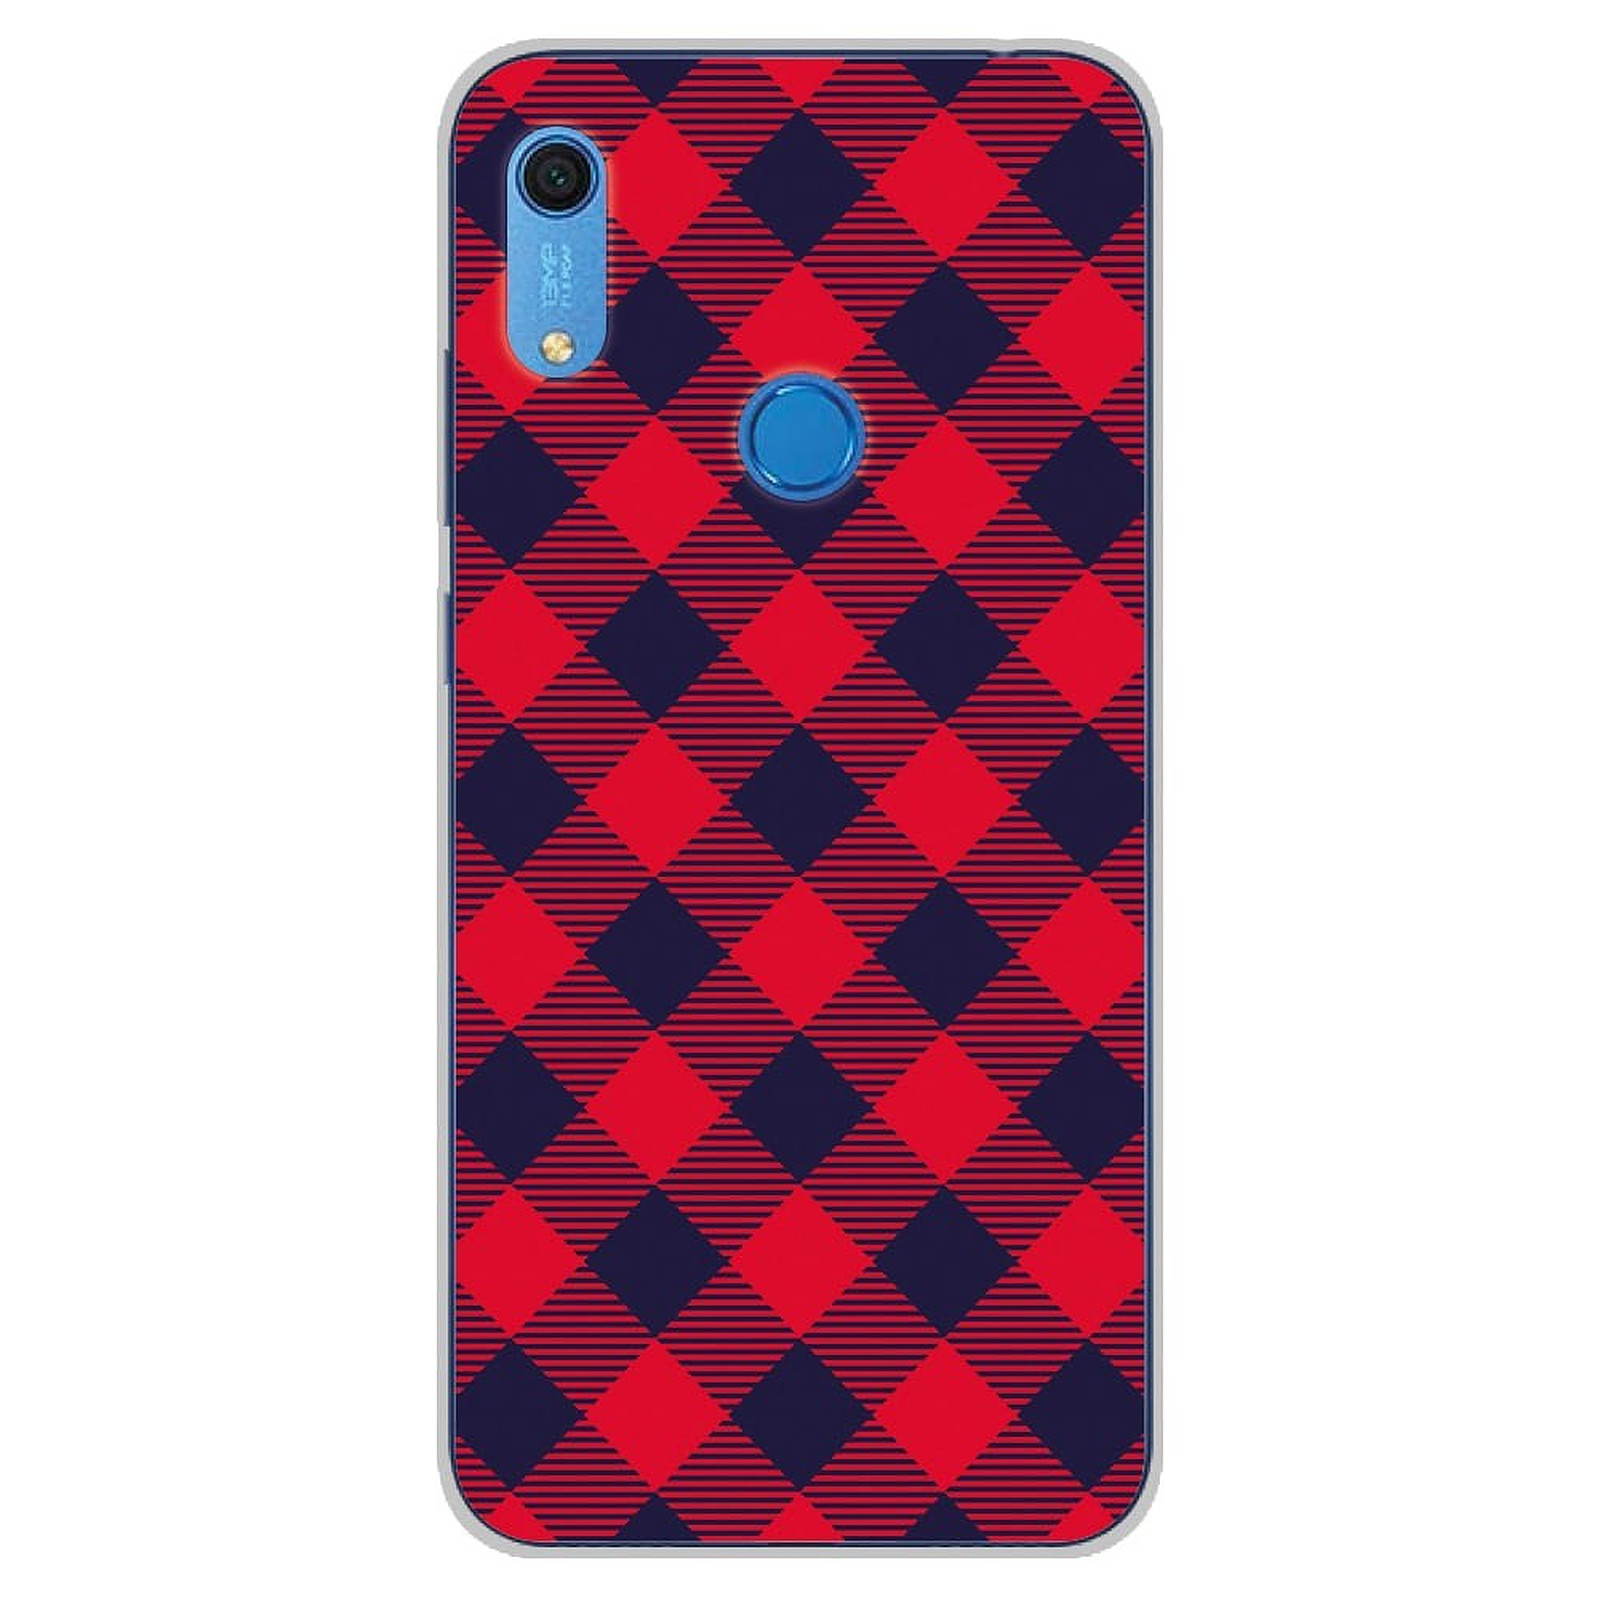 1001 Coques Coque silicone gel Huawei Y6S motif Tartan Rouge - Coque telephone 1001Coques